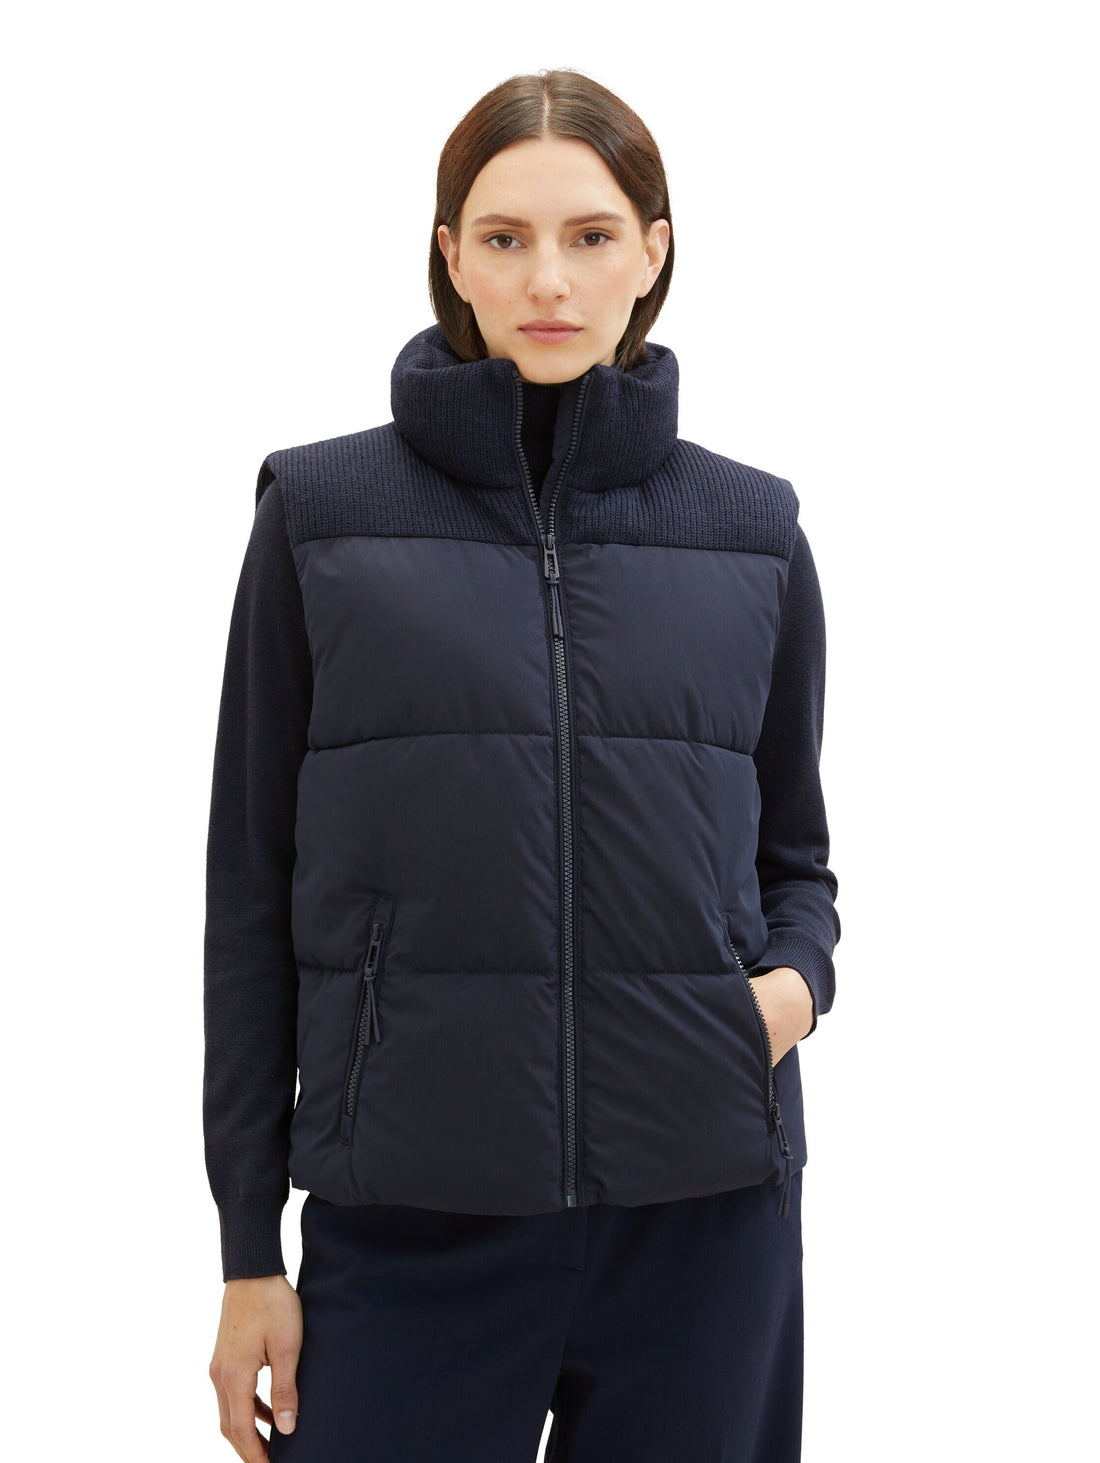 Padded Vest With High Collar_1038676_10668_02